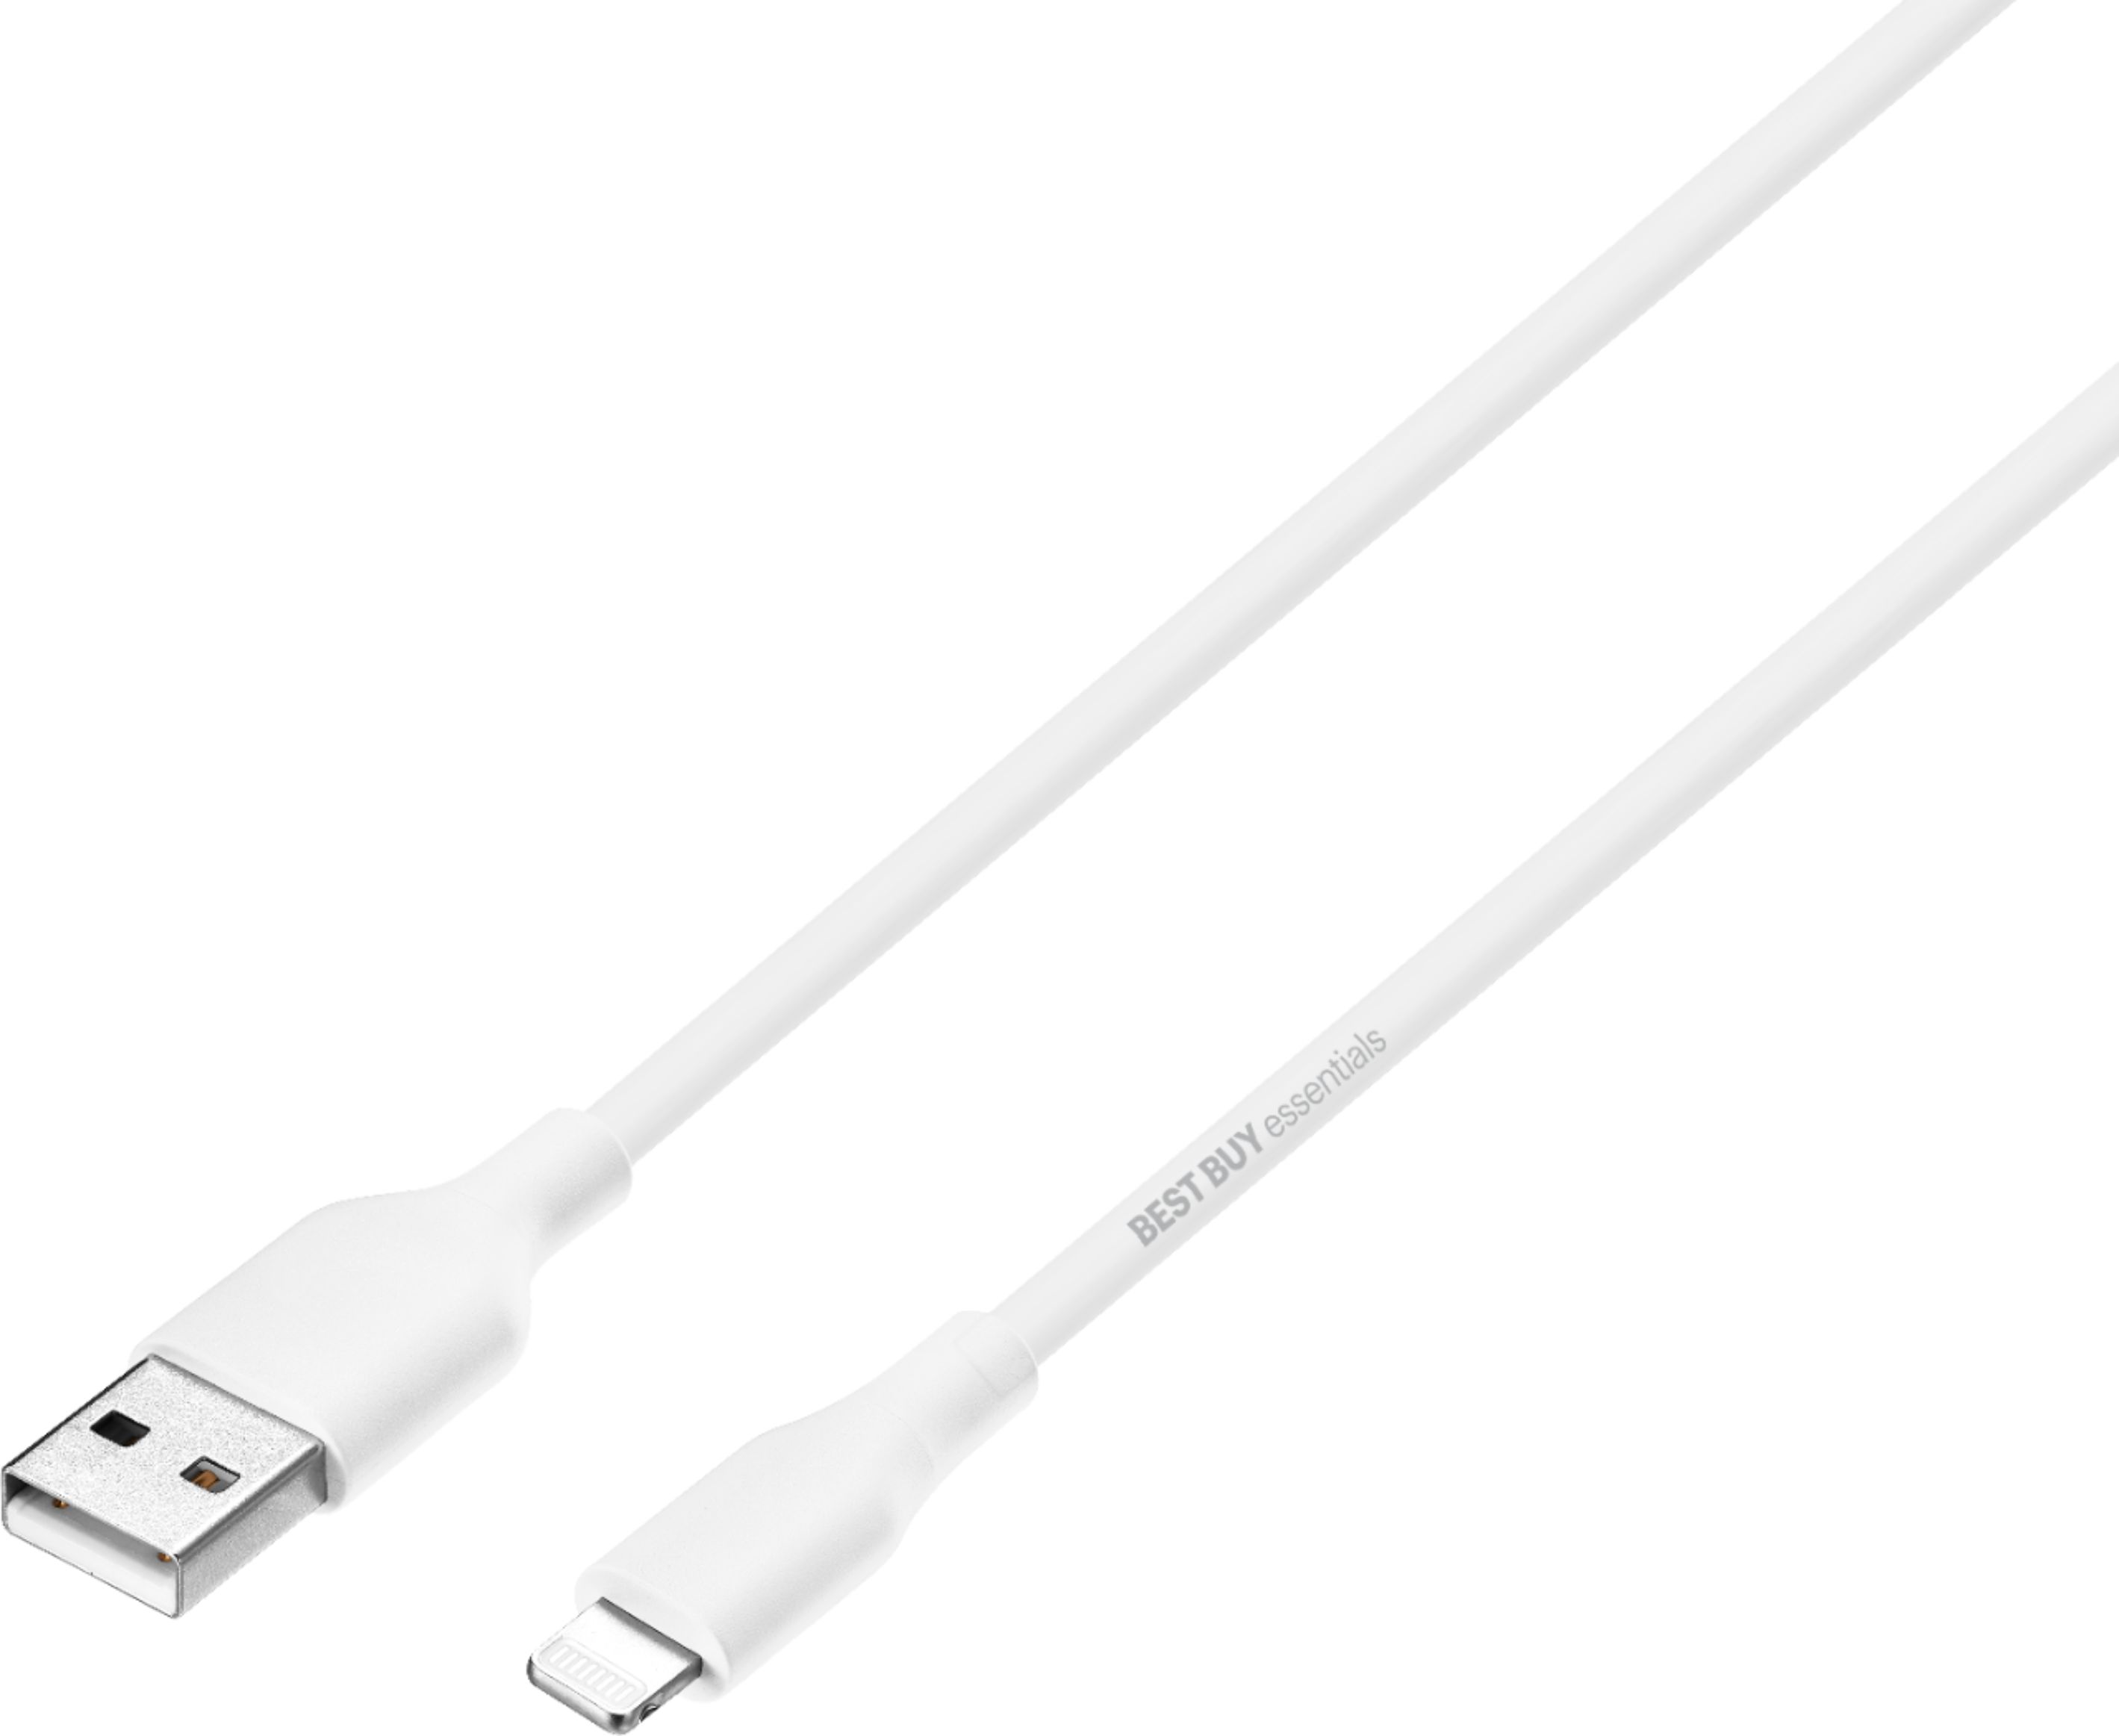 deals: This $10 USB-C charging cable will power up your